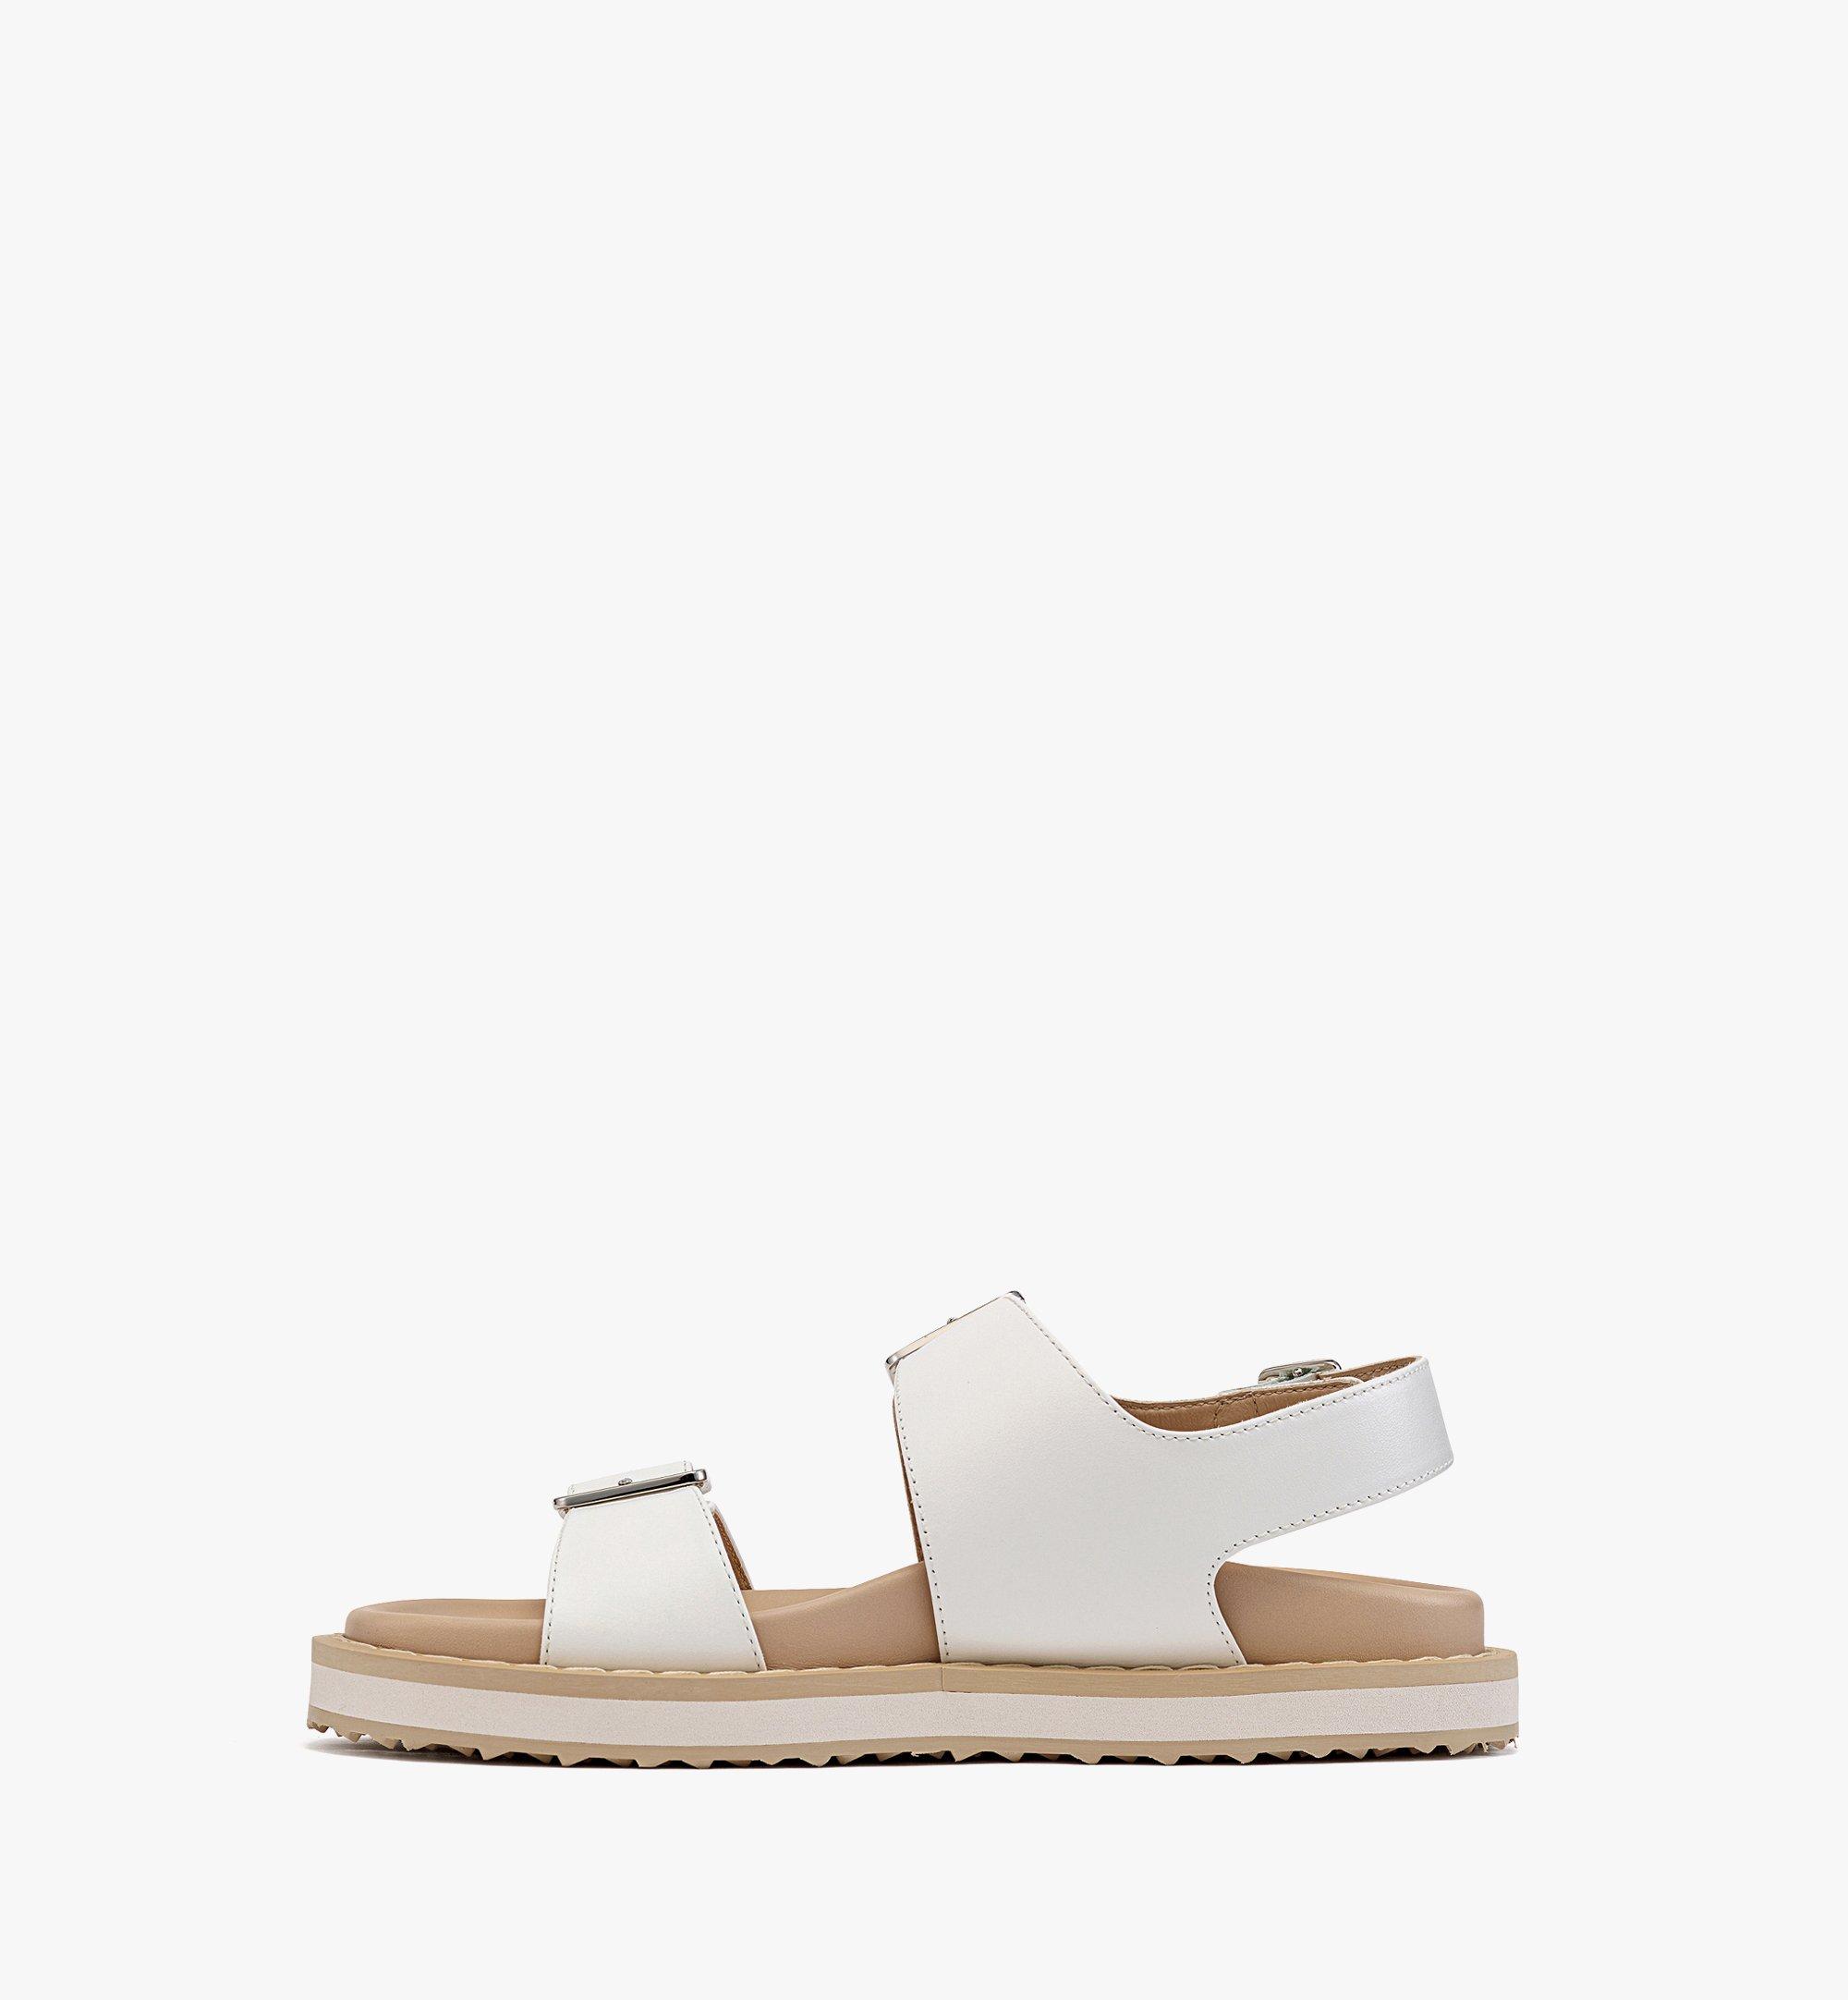 37 IT Sandals in Calf Leather White | MCM ®SG